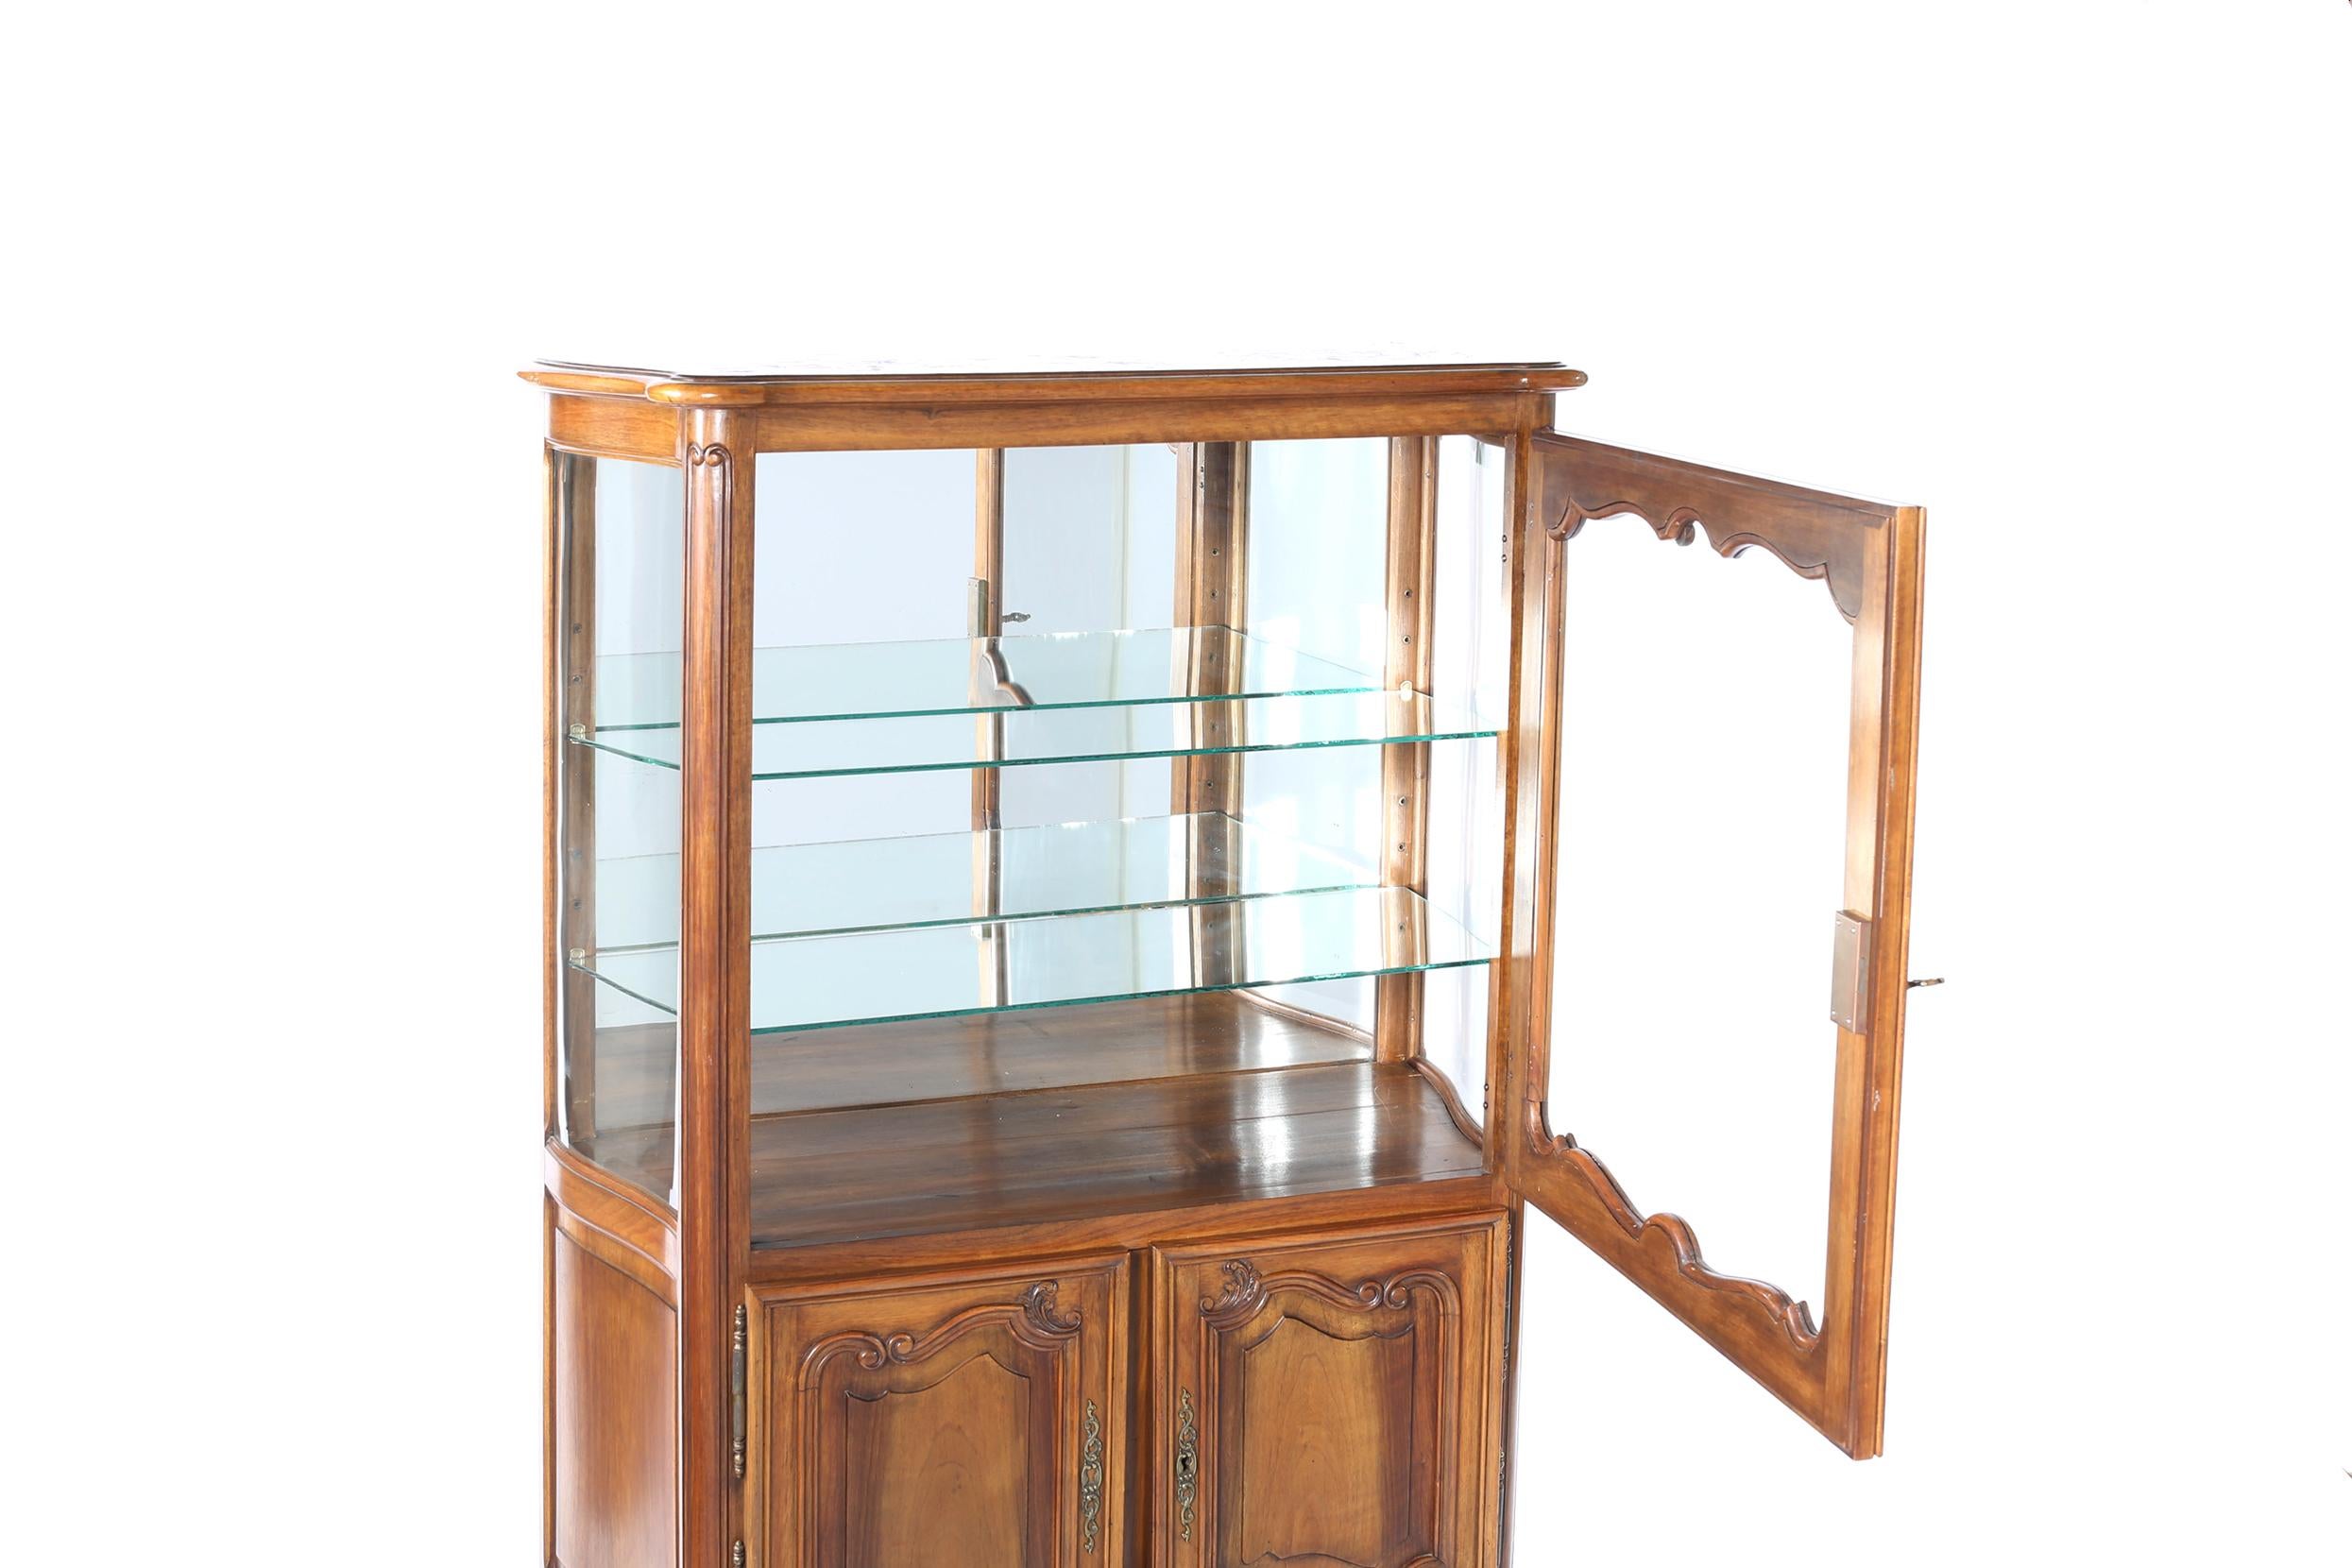 Late 19th century walnut with mirrored interior and glass shelving with front bottom doors China cabinet or hutch. The cabinet is in good antique condition with appropriate wear consistent with age or use. The cabinet stand about 56 inches high x 39